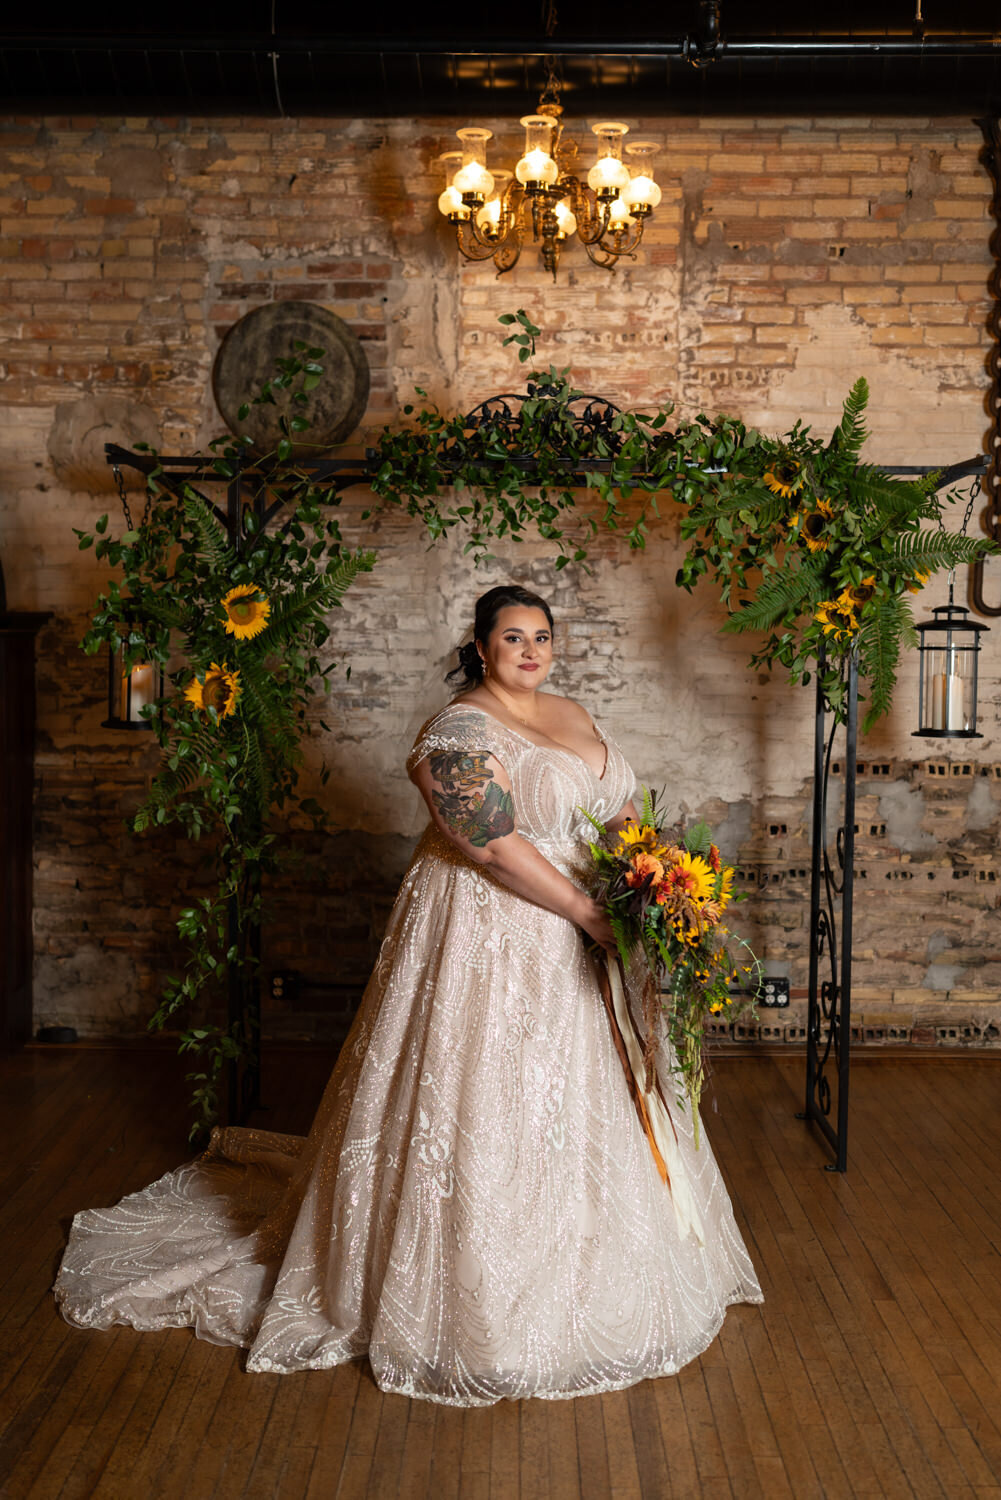 Plus size bride smiles while holding sunflowers at Kellerman's Event Center.